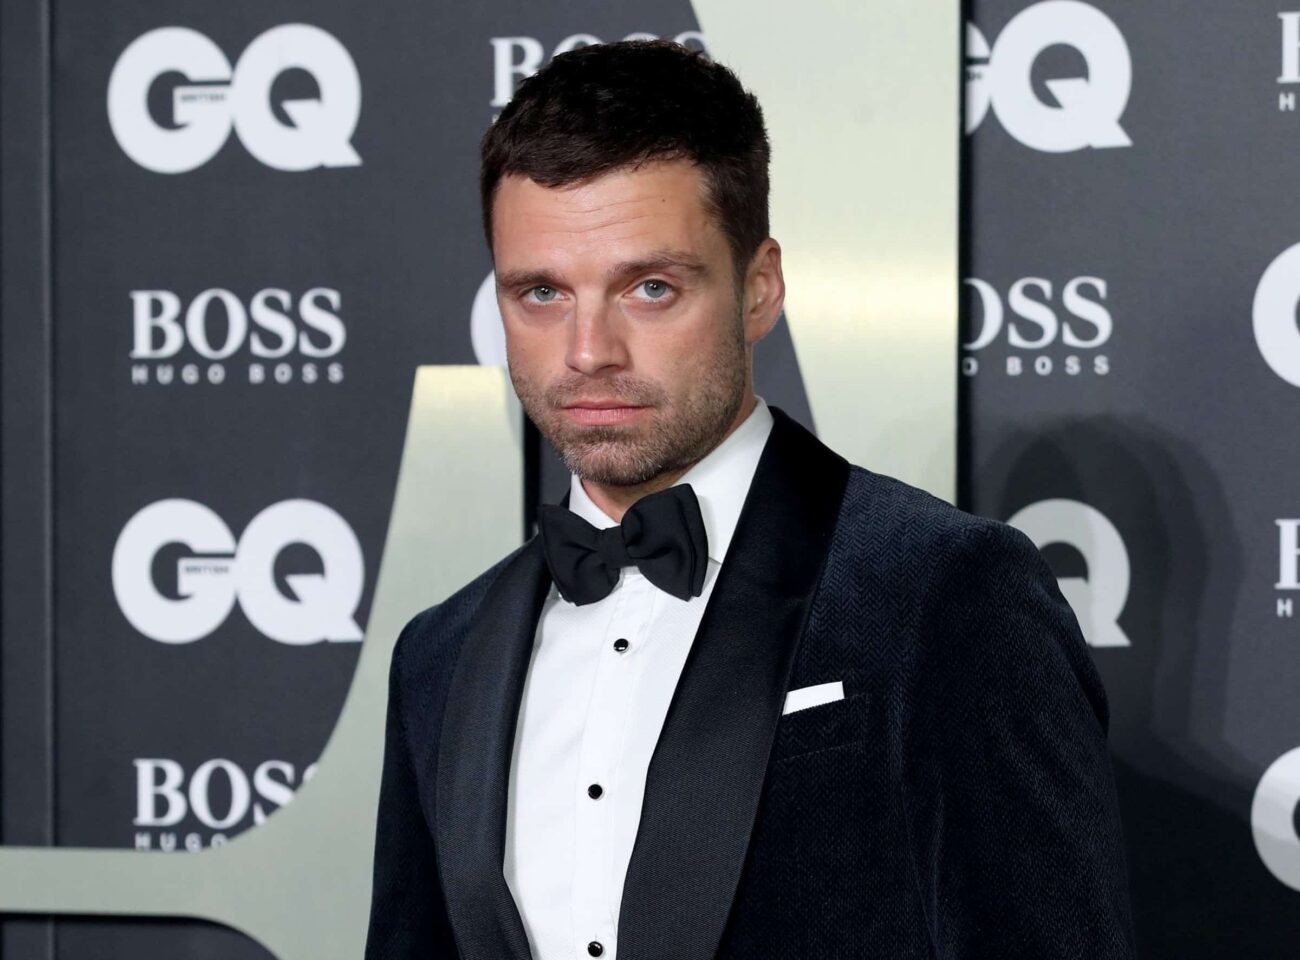 Follow Sebastian Stan on Instagram? You will once you read this story. Put your glasses on and take a peek at the reactions to the actor's latest post!